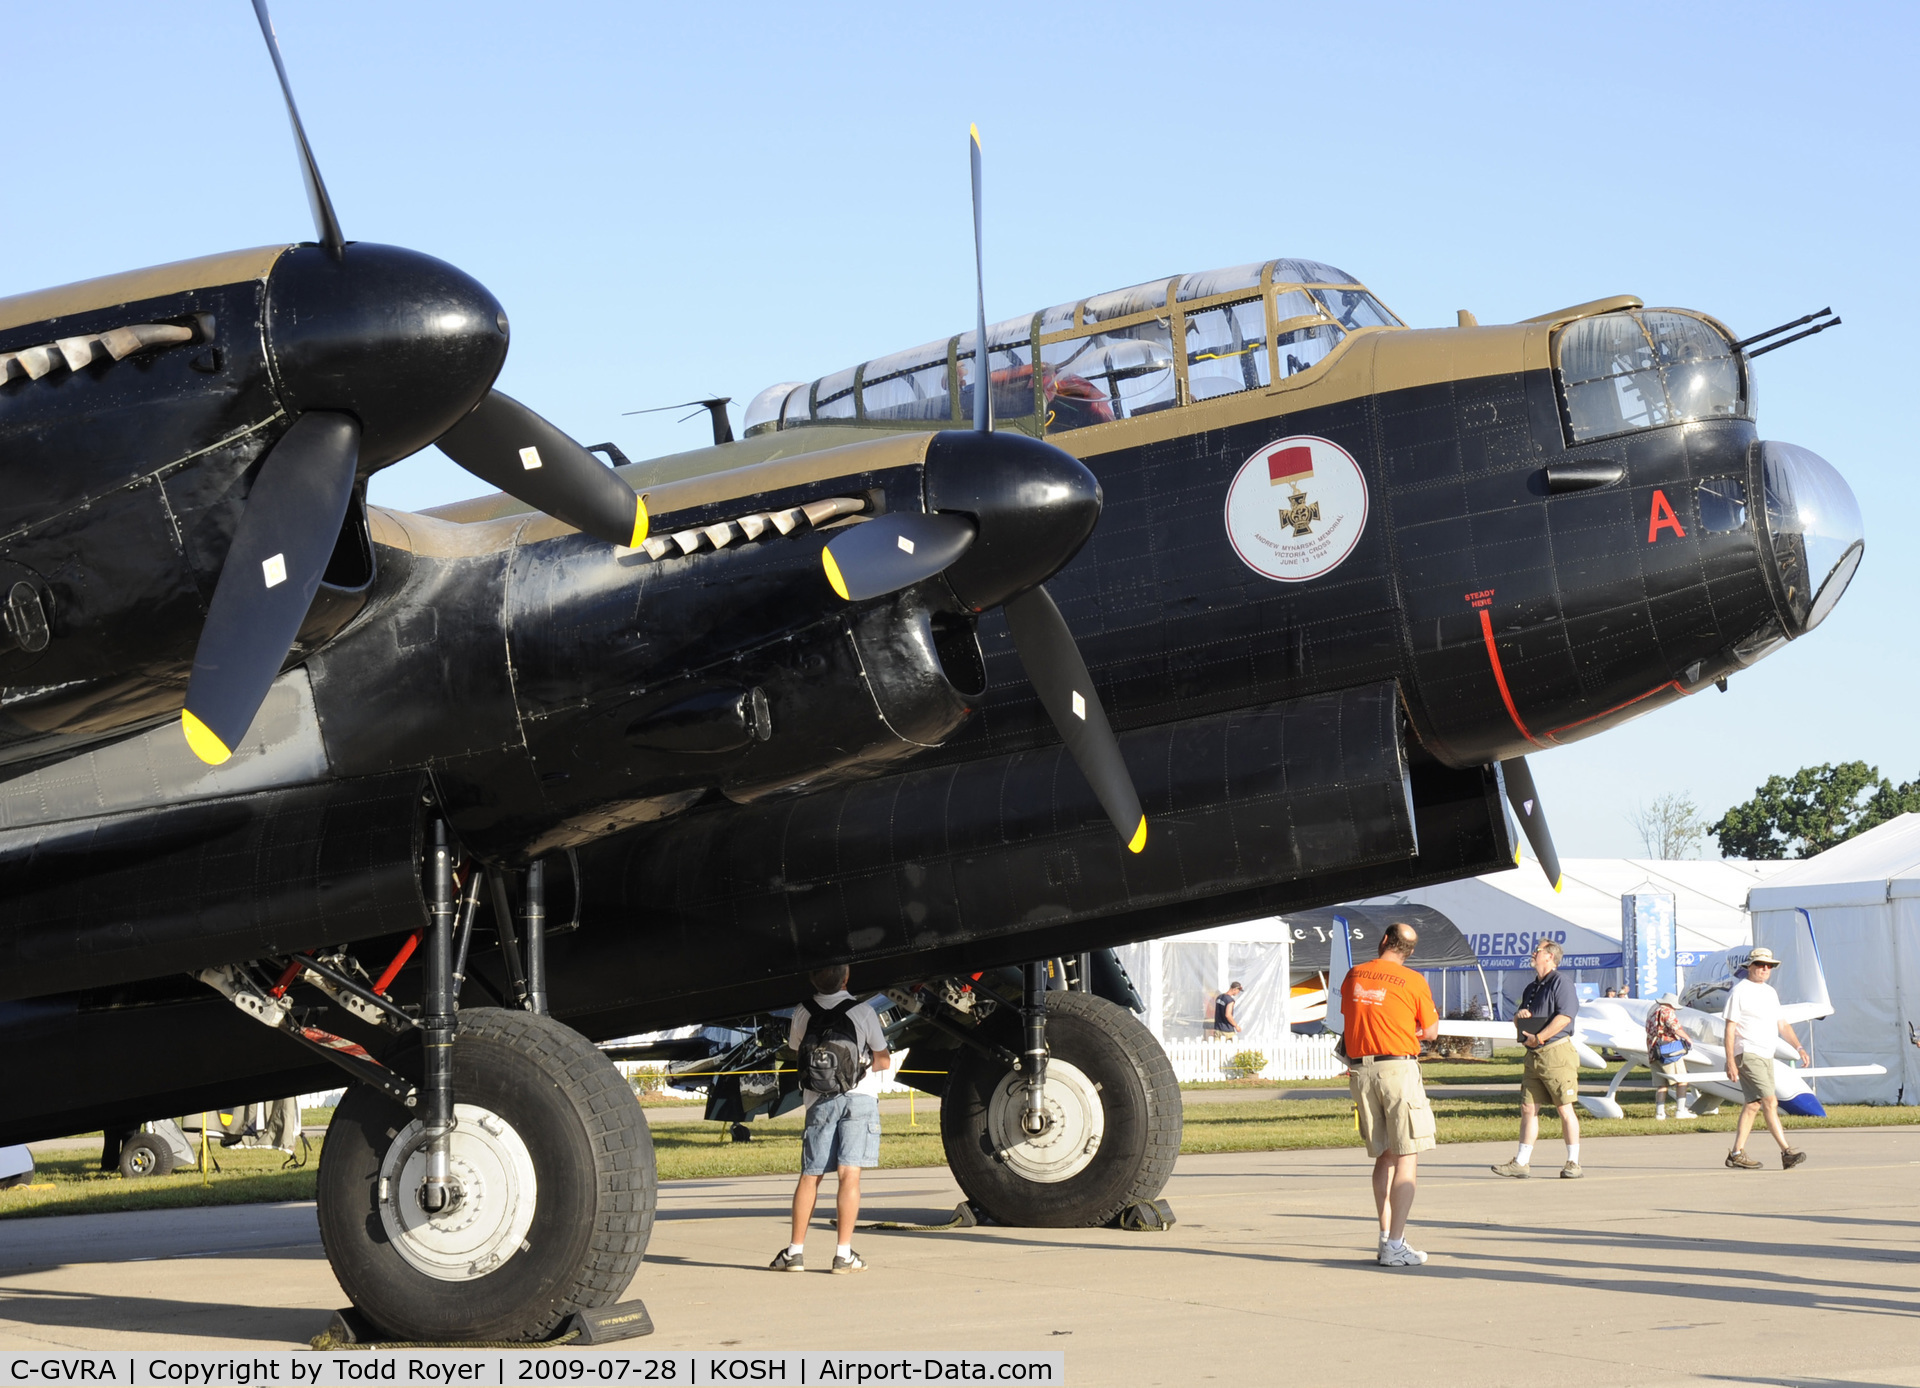 C-GVRA, 1945 Victory Aircraft Avro 683 Lancaster BX C/N FM 213 (3414), EAA AIRVENTURE 2009